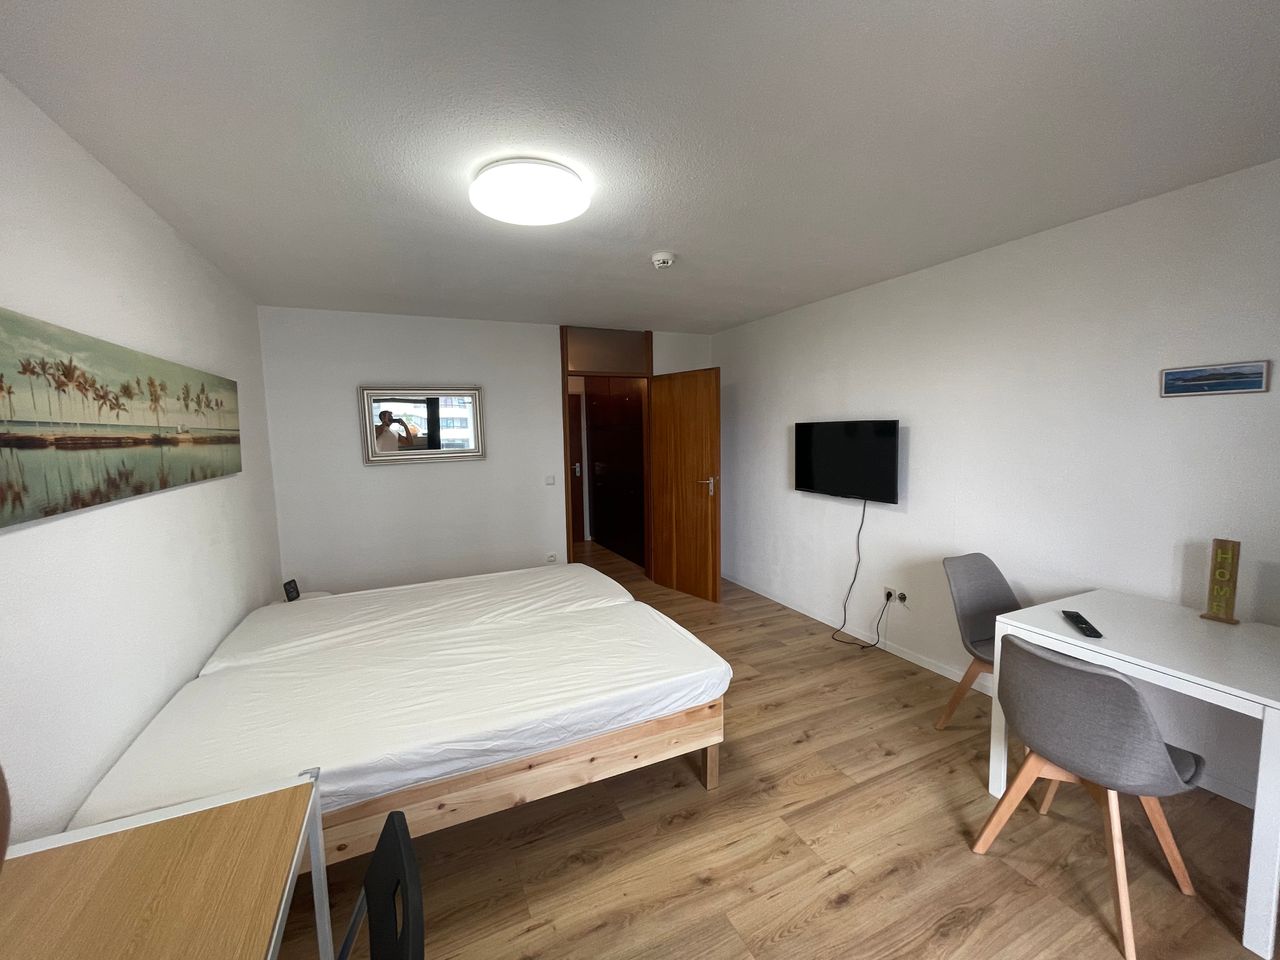 Studio appartment in Nürnberg with good Remote work posibility